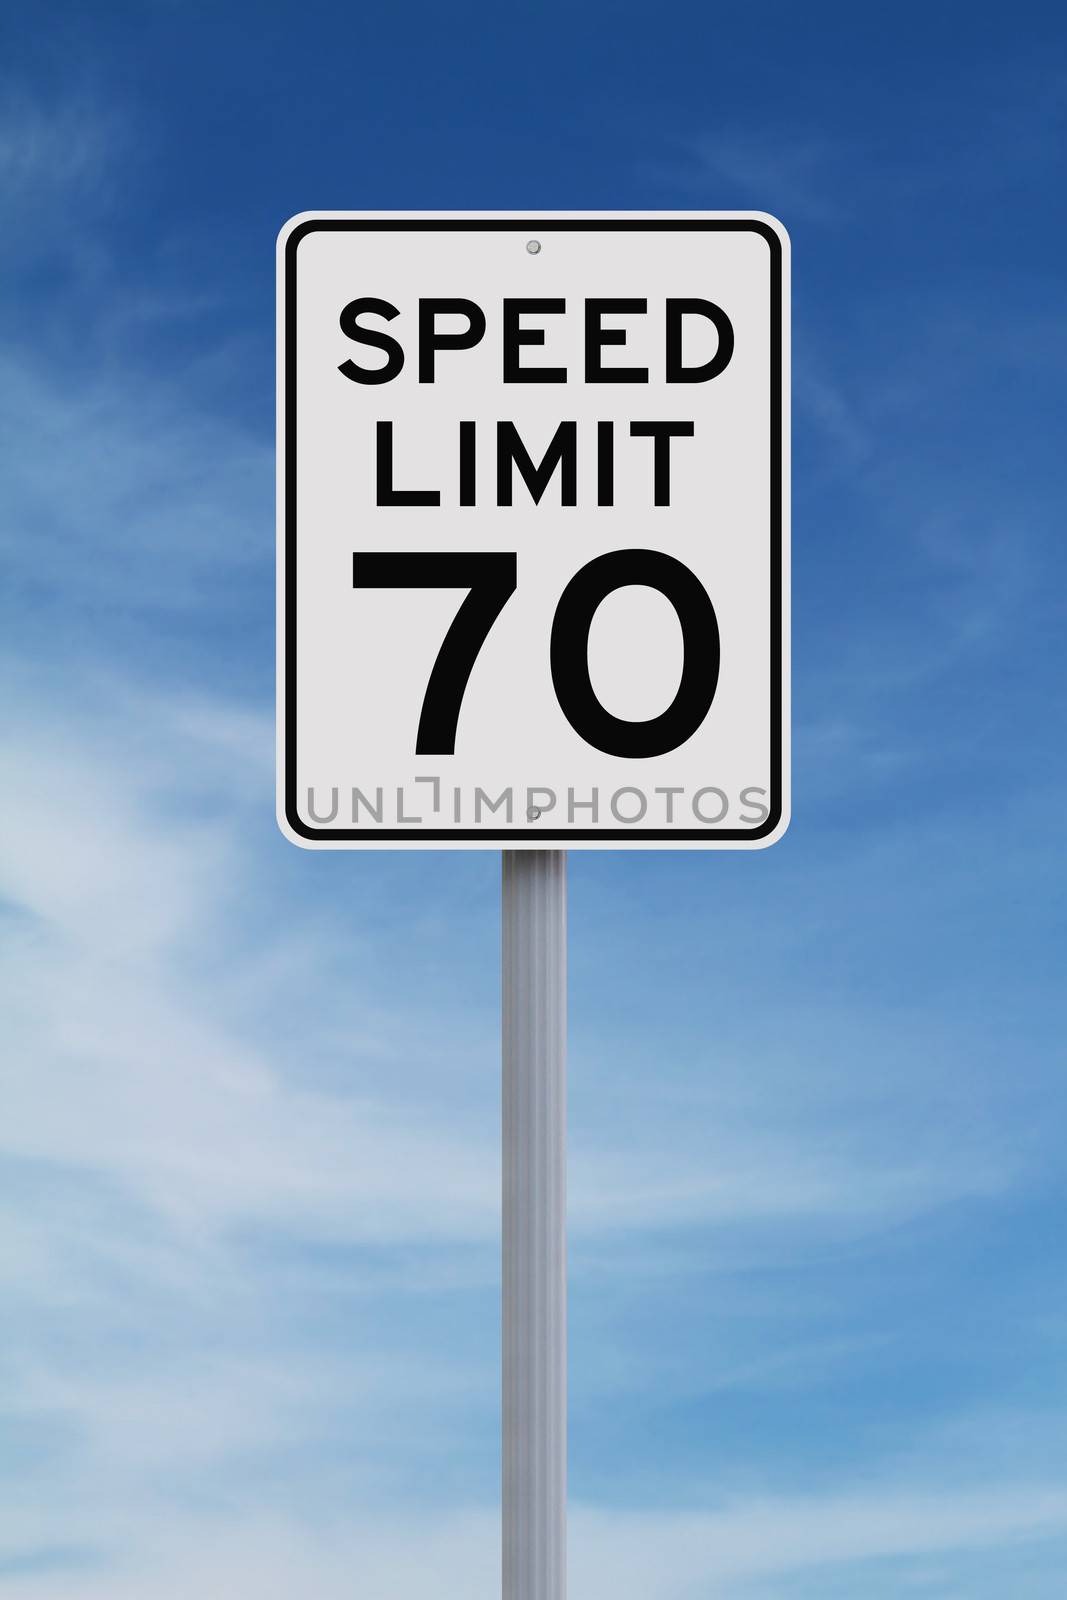 A speed limit sign indicating seventy